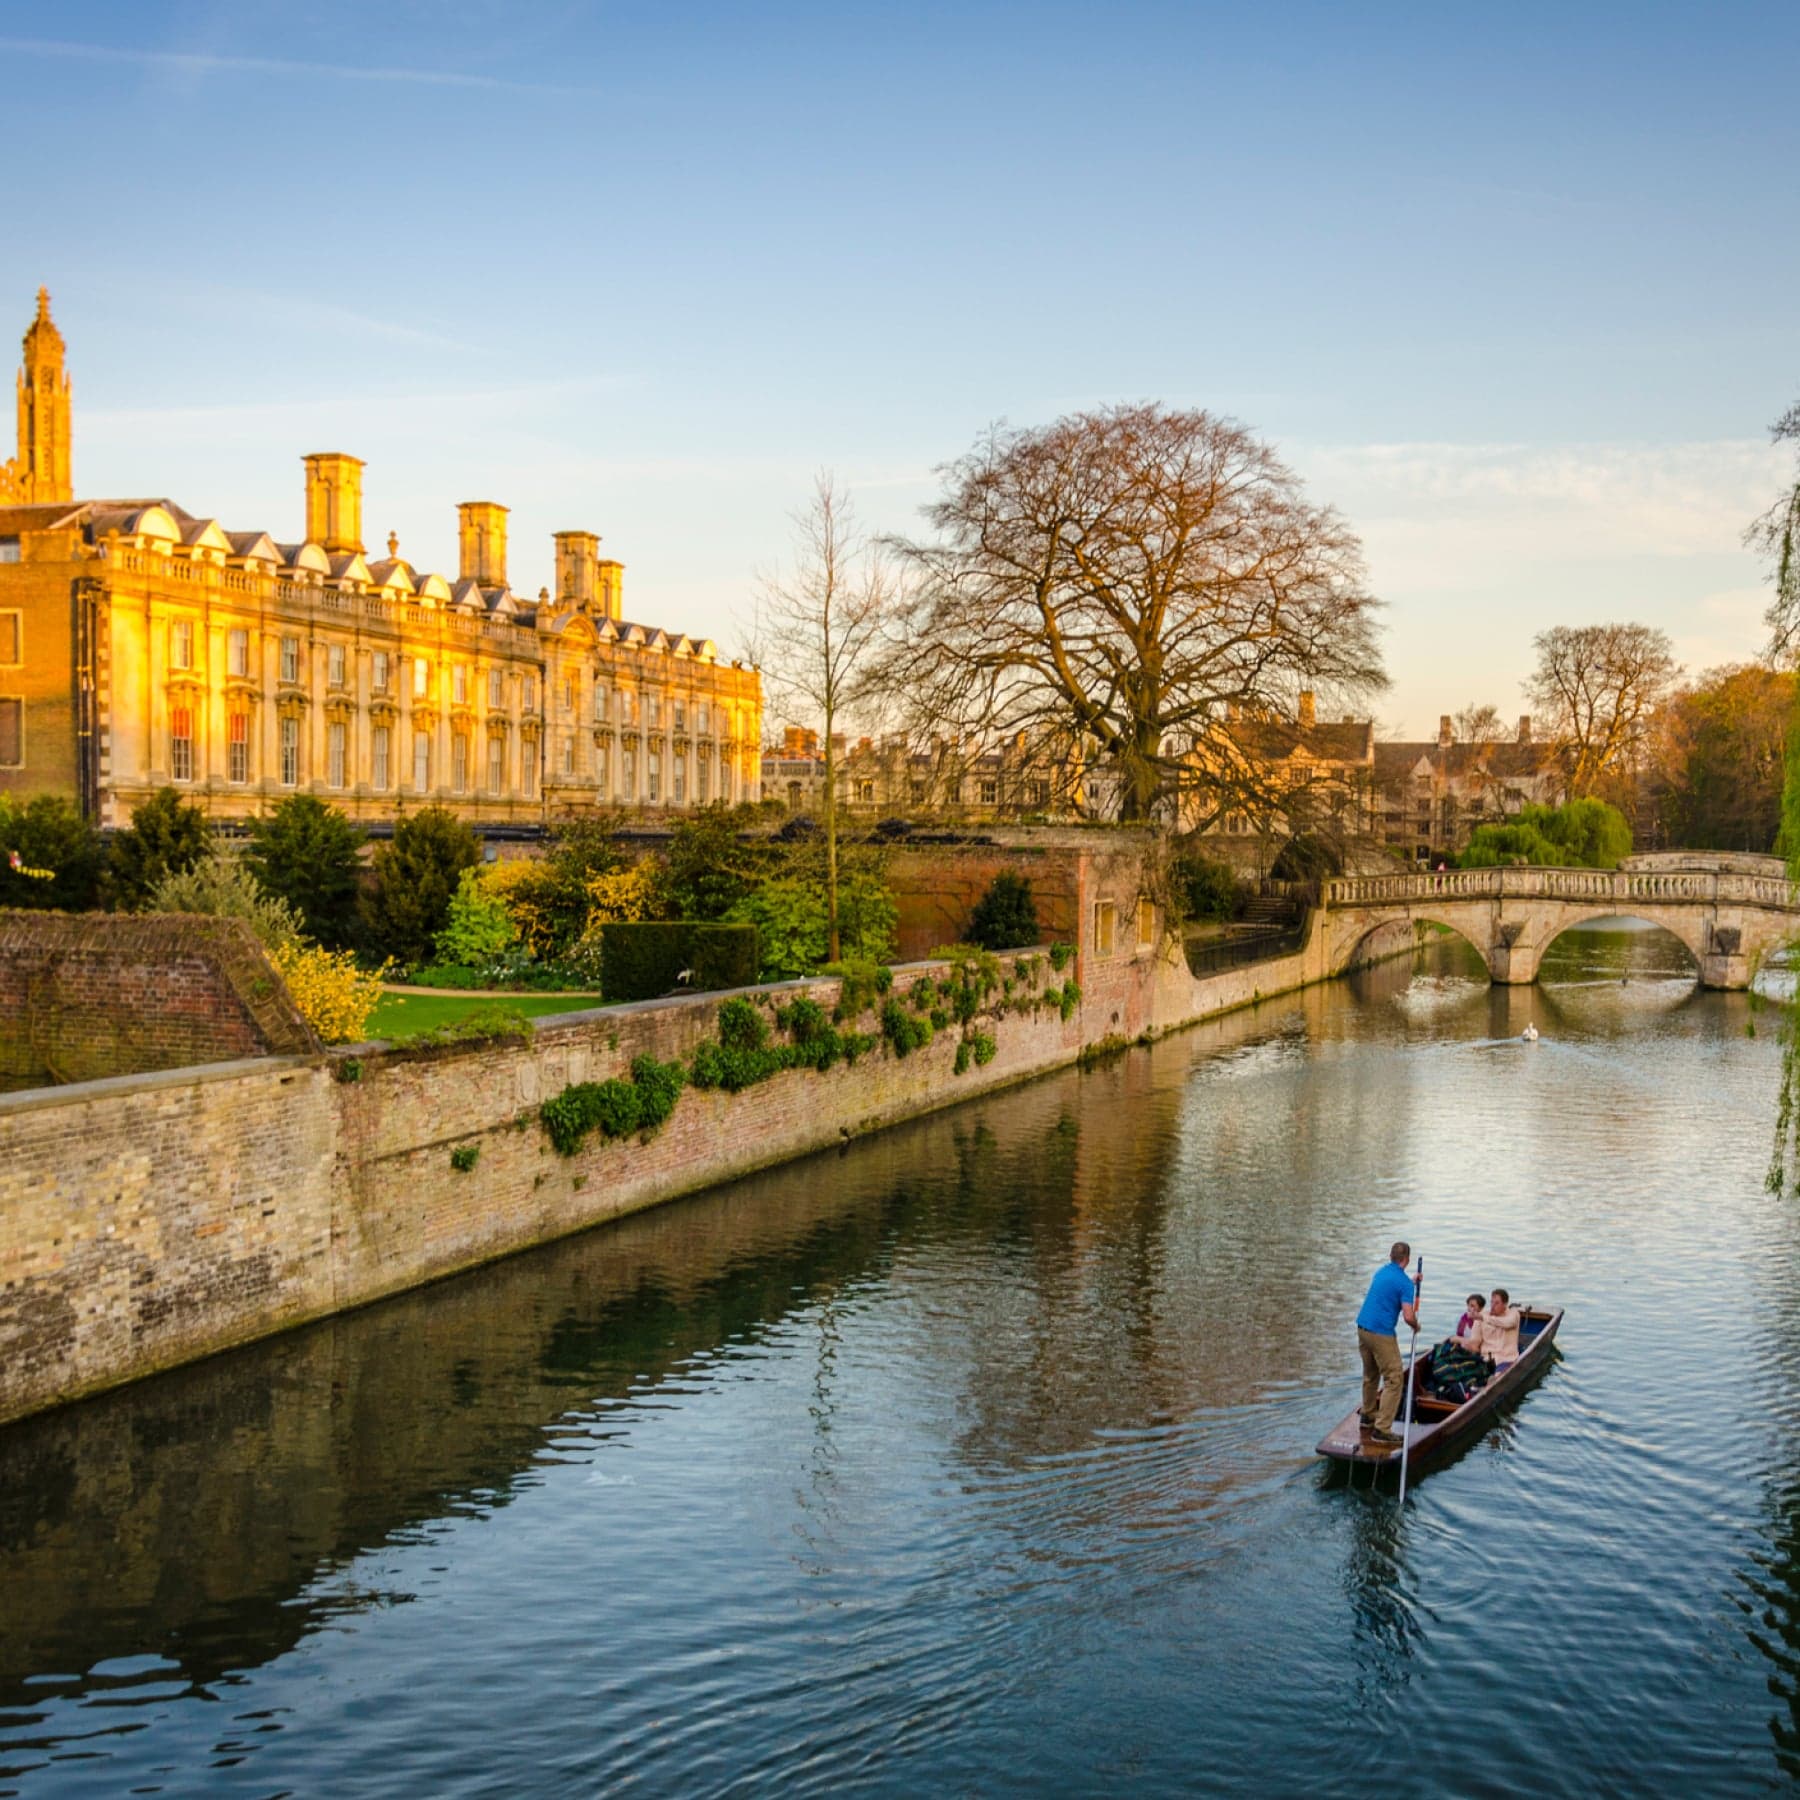 Cambridgeshire is one of the best places to take a UK break